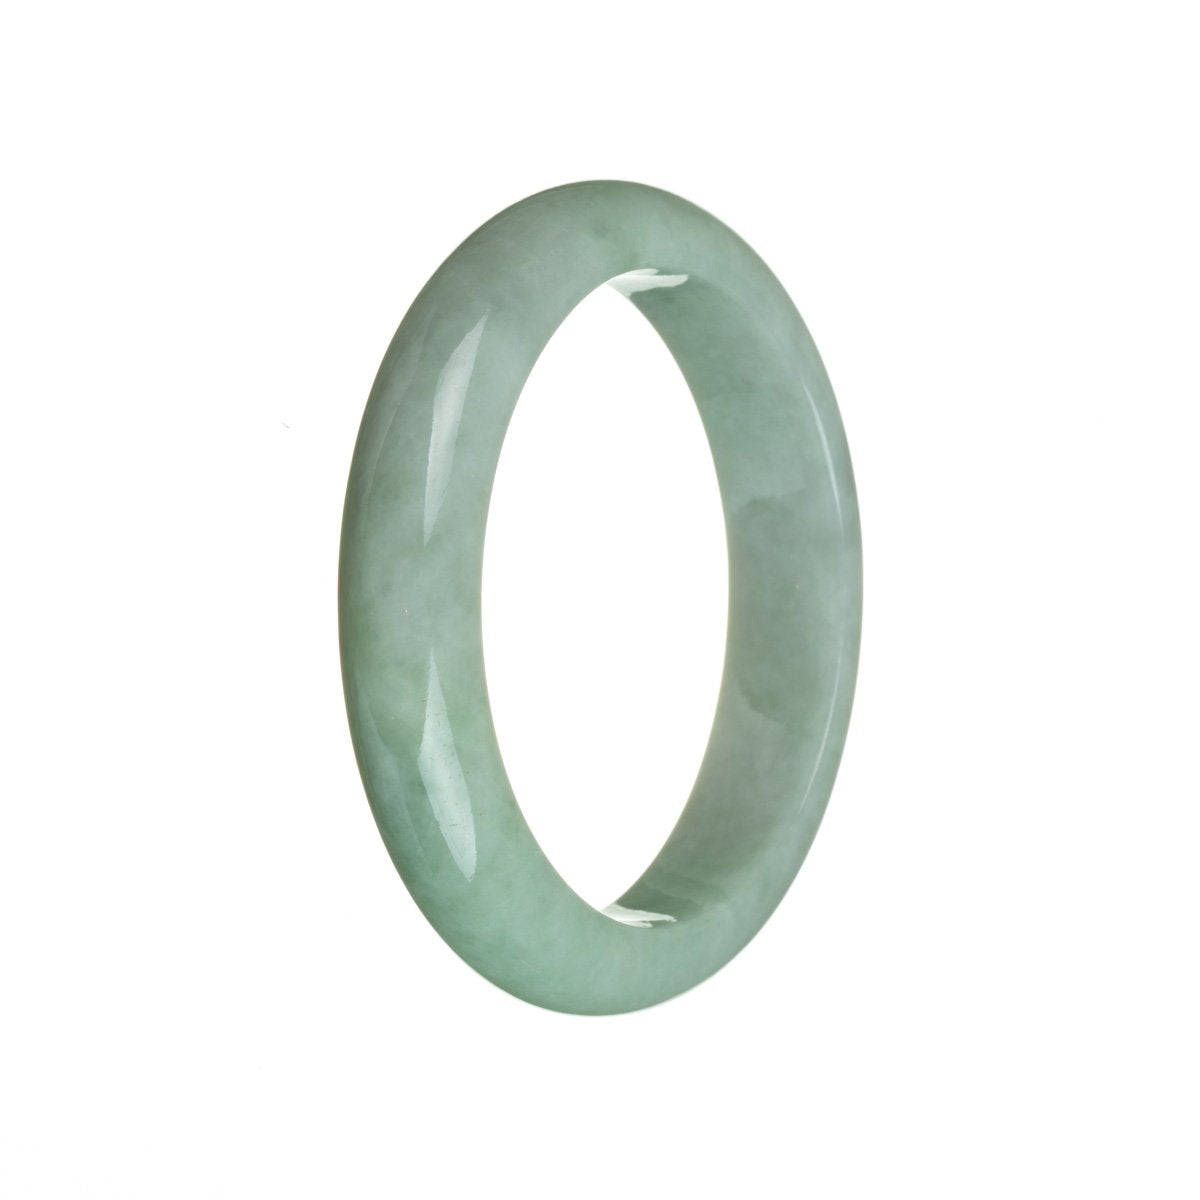 A light green jadeite bangle with a semi-round shape, measuring 58mm in size.